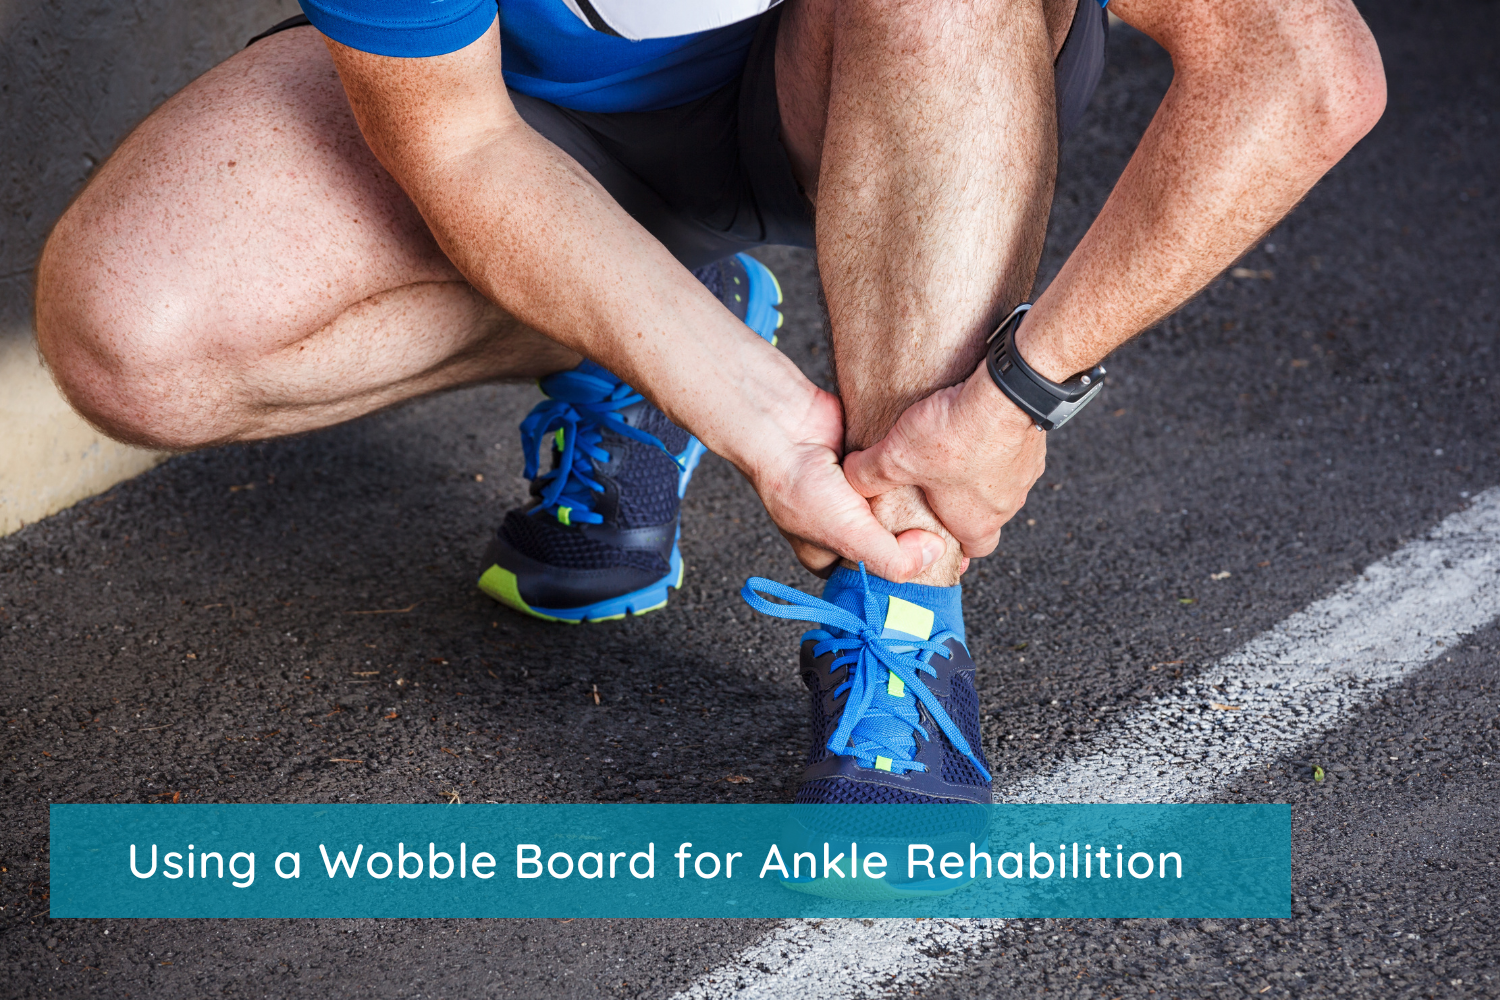 Ankle Injury Recovery: Using a Wobble Board for Ankle Rehabilitation